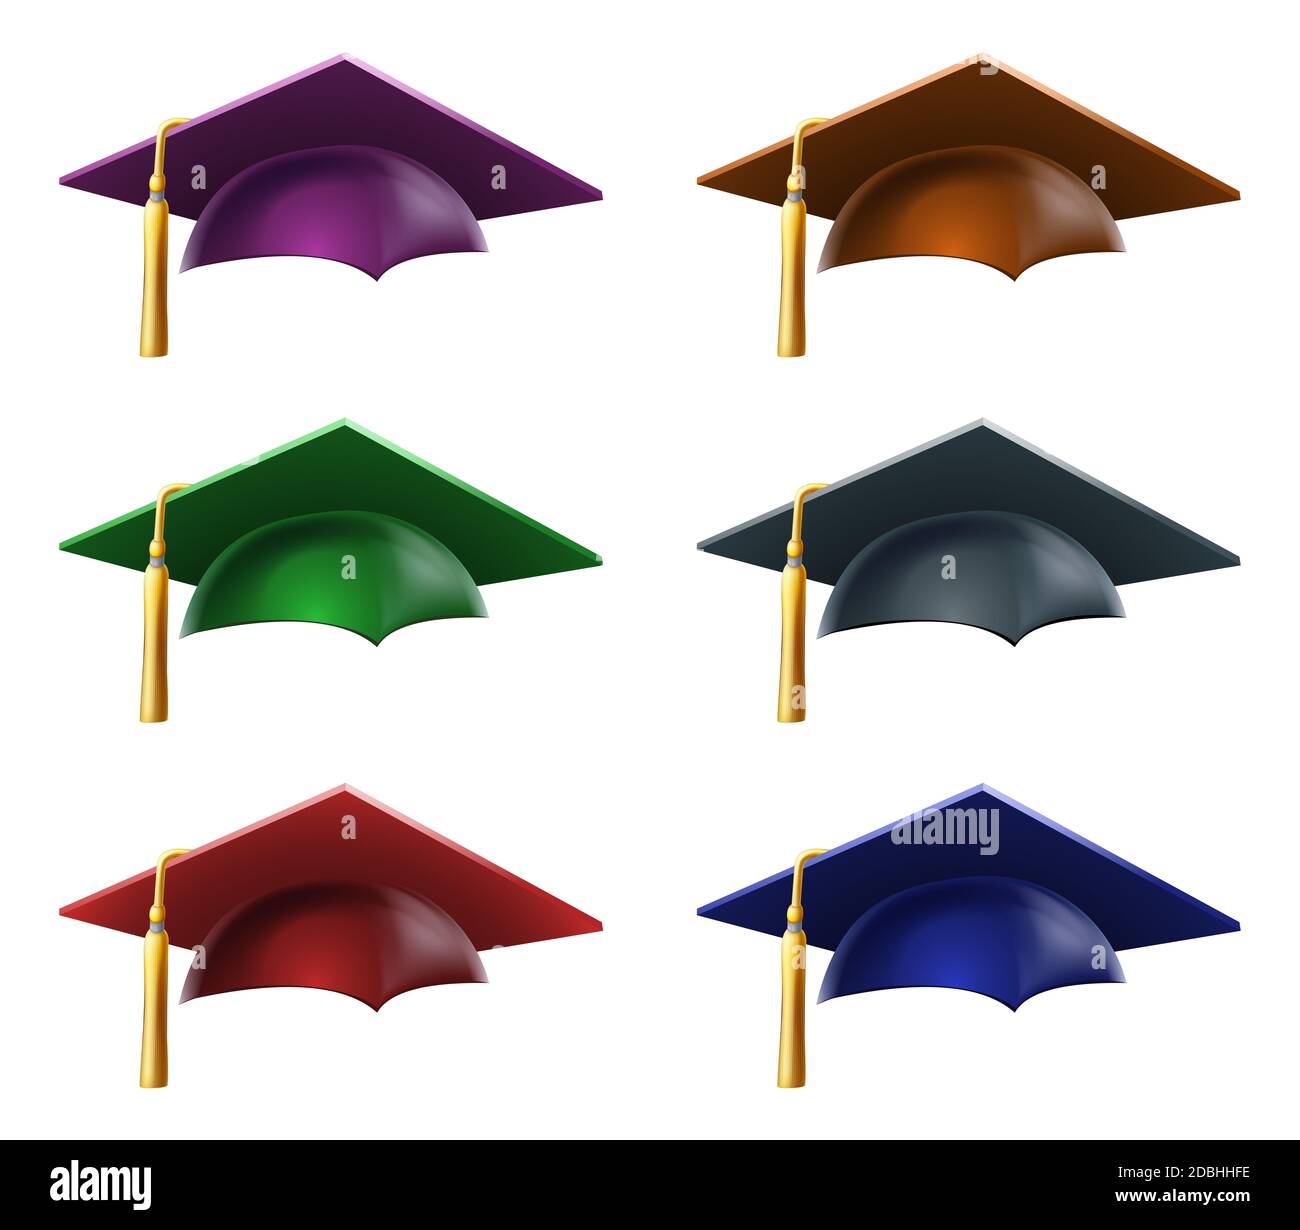 A set of a Graduation or convocation mortarboard hats or caps in different colors Stock Photo